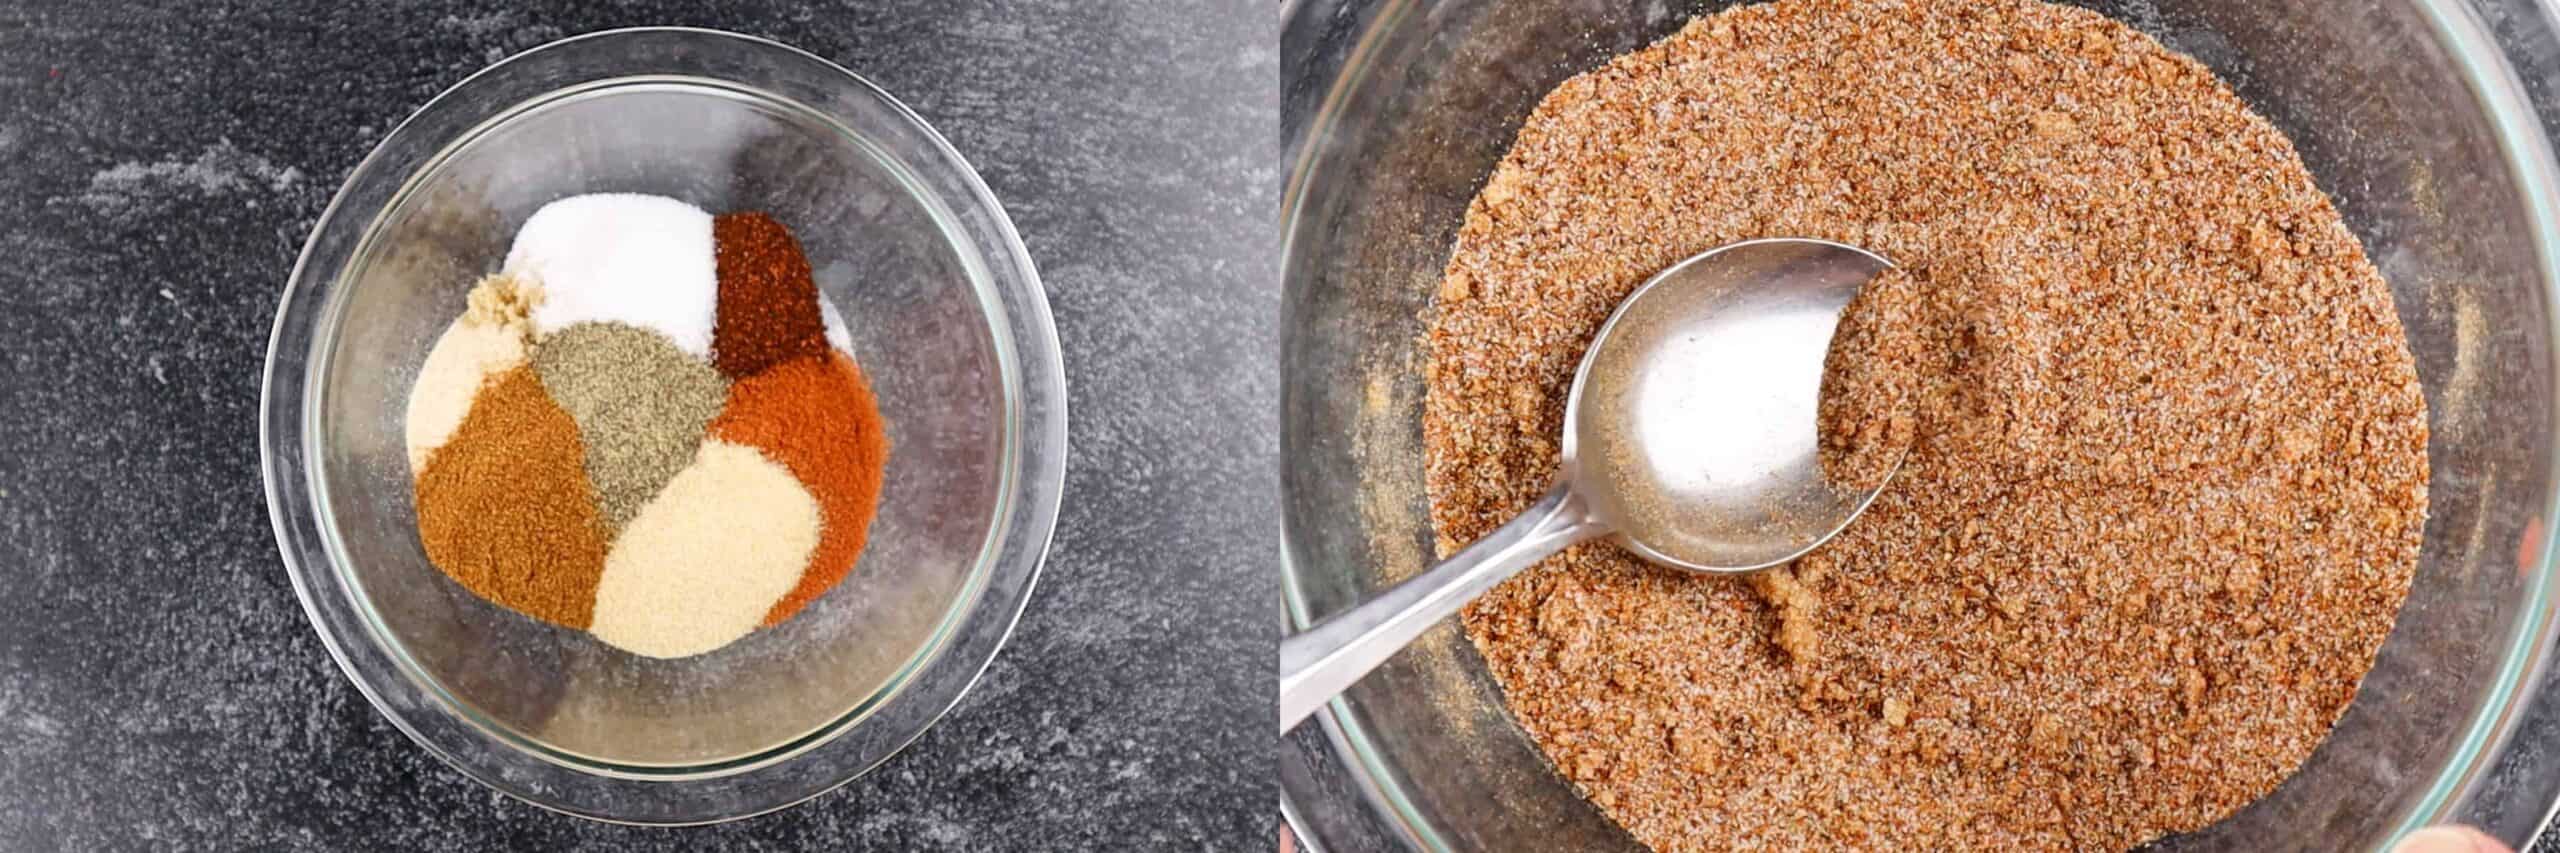 before and after mixing the spice rub